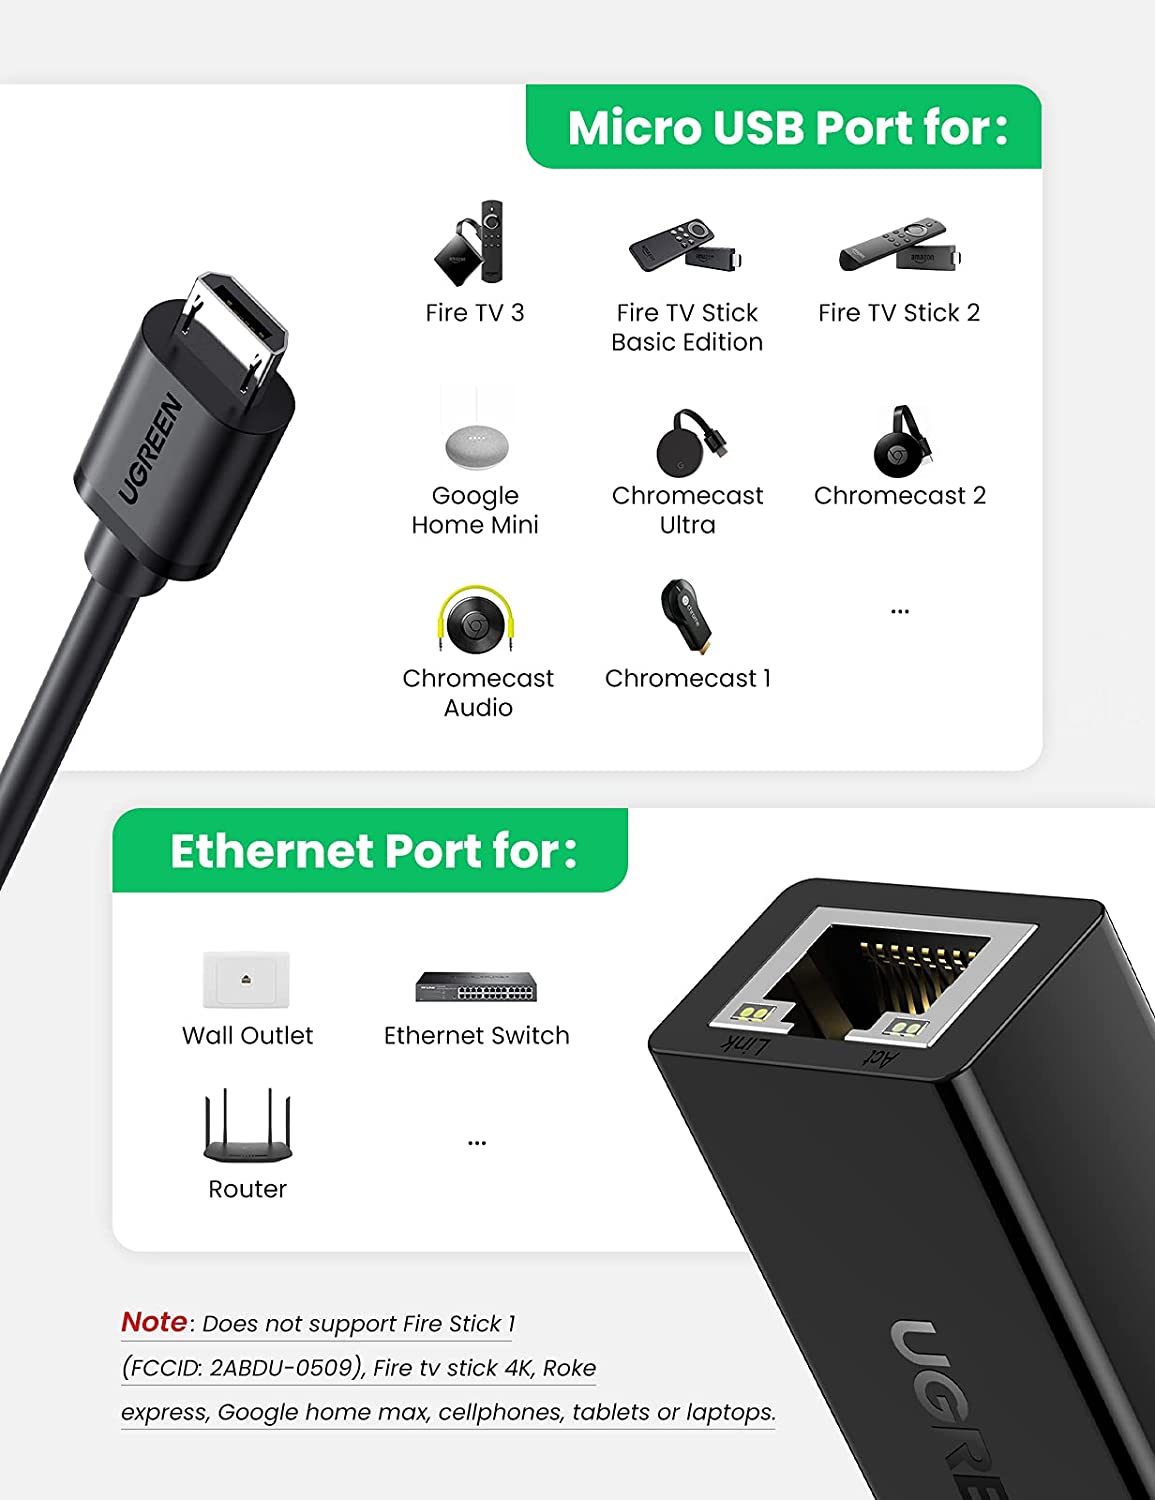 UGREEN Ethernet Adapter for Fire TV Stick (2nd GEN), All-New Fire TV (2017), Chromecast Ultra/2/1/Audio, Google Home Mini, Micro USB to RJ45 Ethernet Adapter with USB Power Supply Cable - 30985 (3.3ft) (Open Box) - Hatke